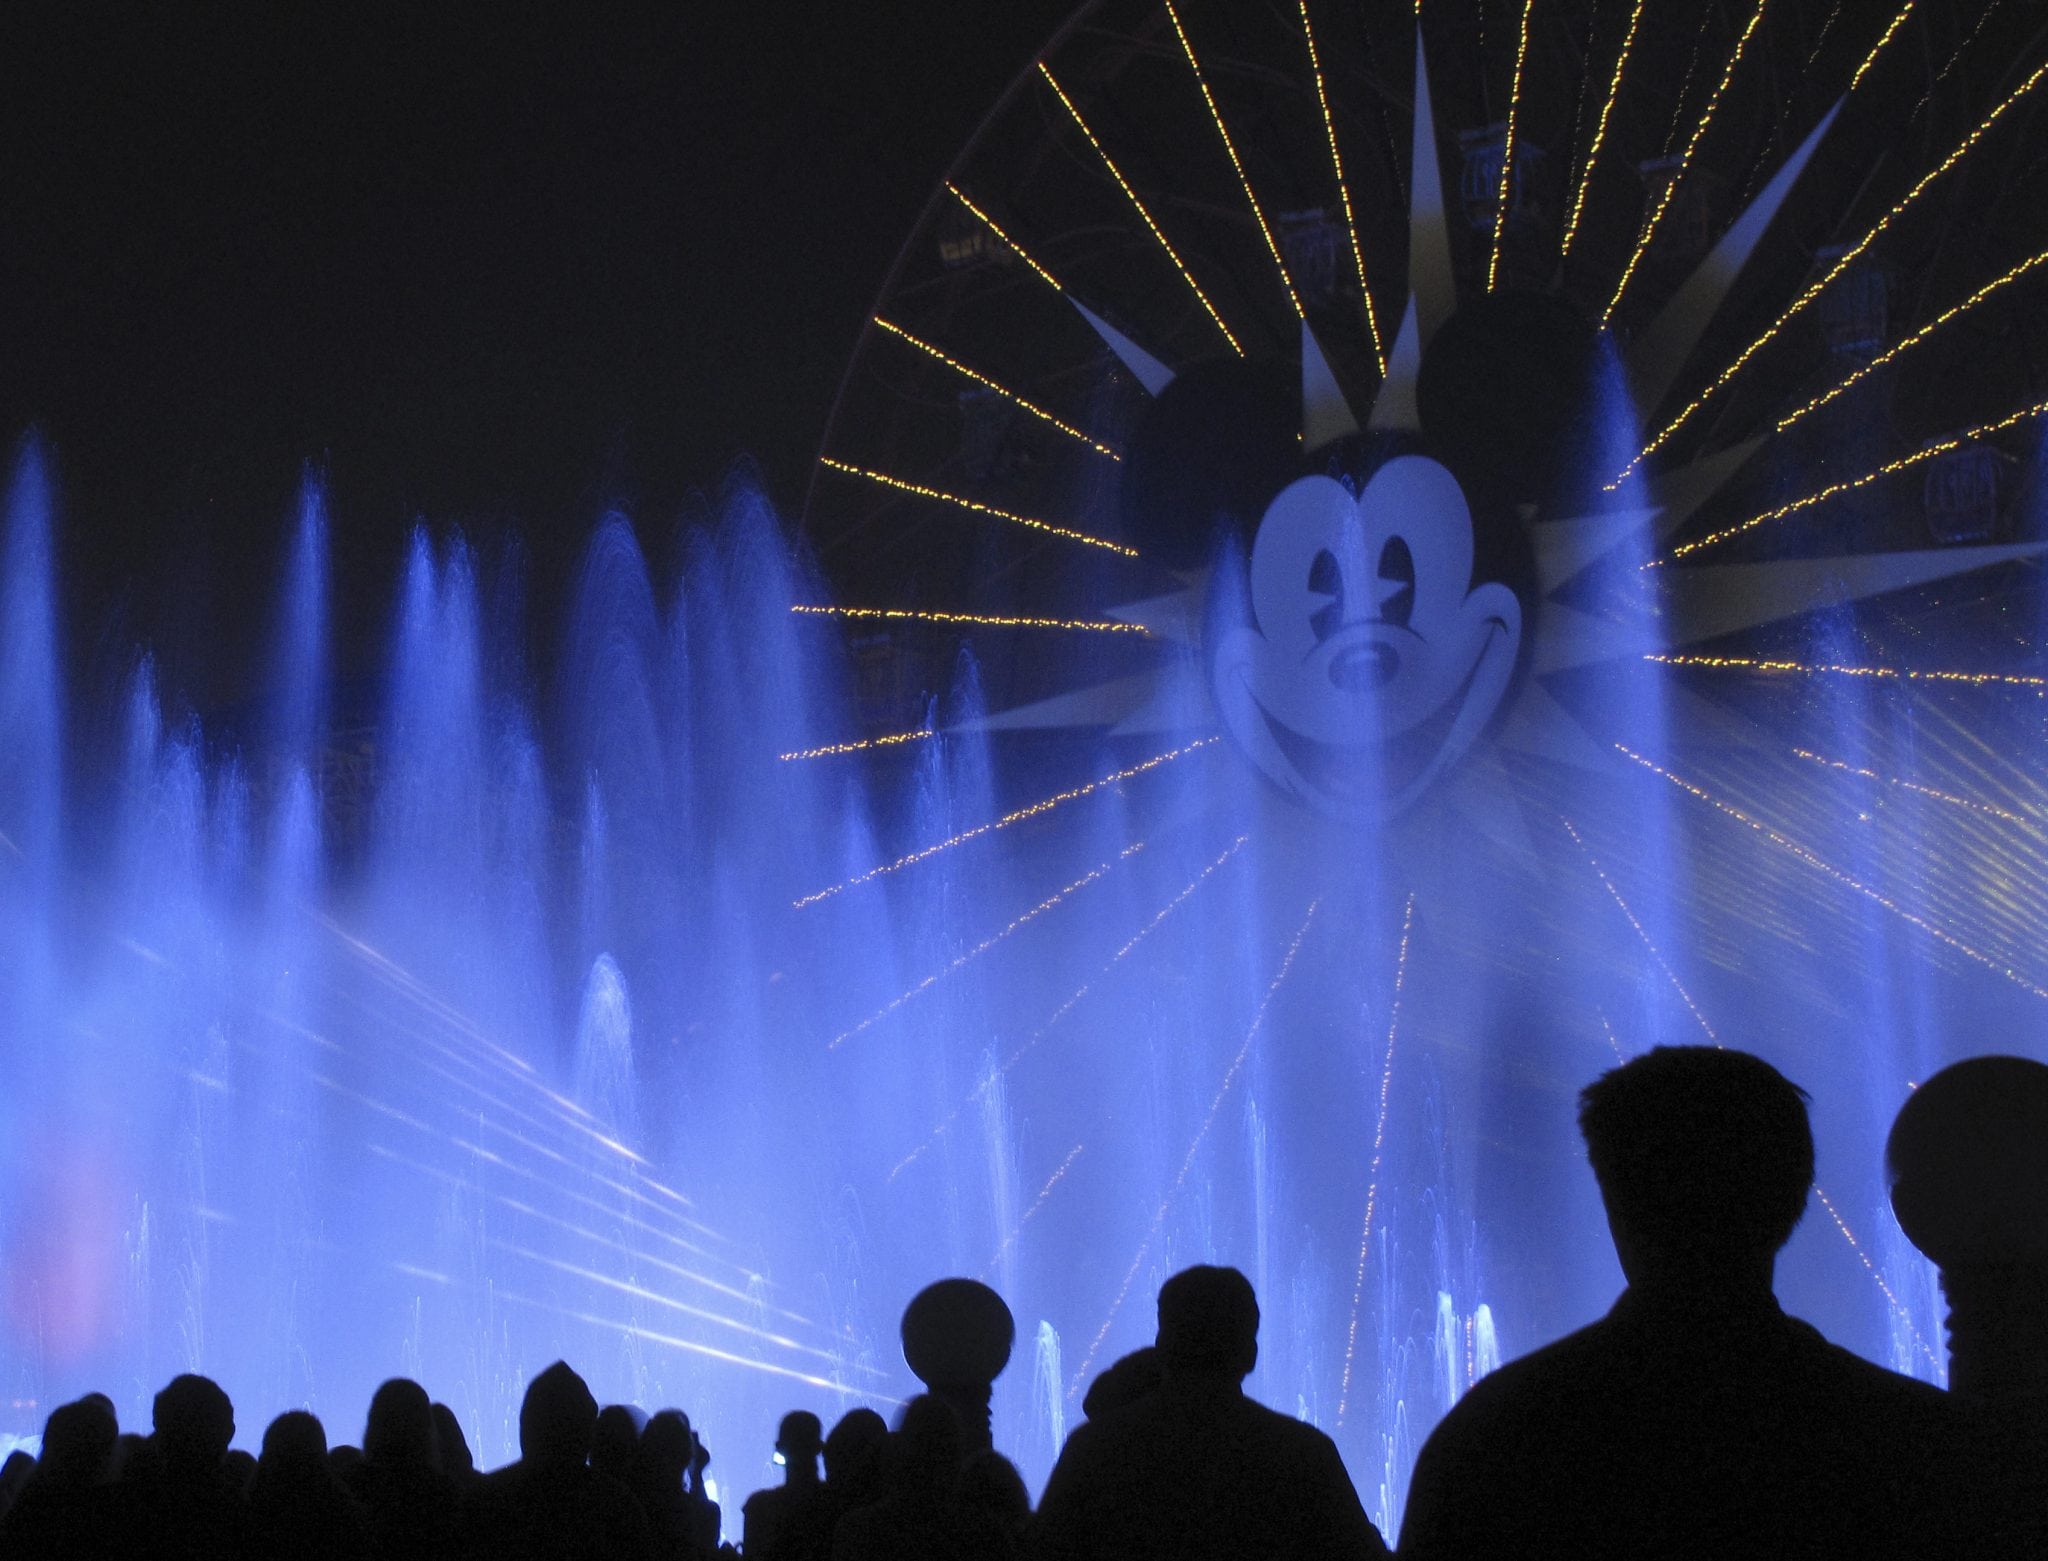 People watch the "World of Color" show at Disneyland in Anaheim, California.